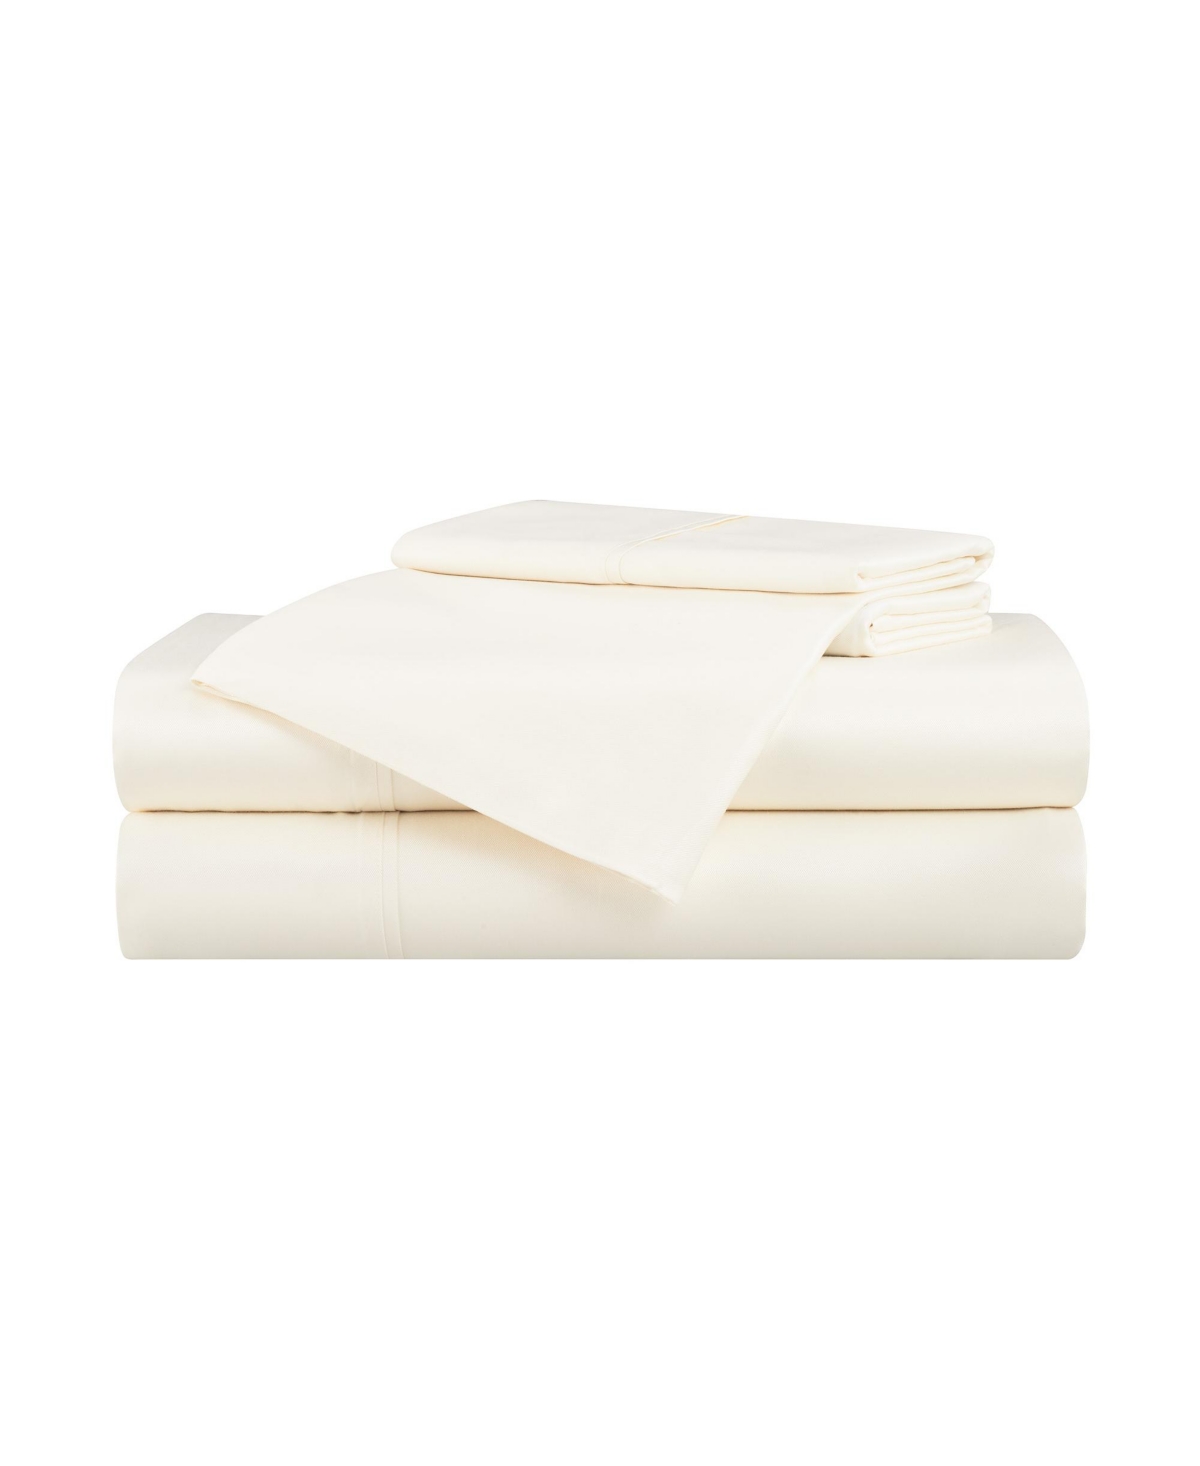 Aston And Arden Rayon From Bamboo California King Sheet Set, Ultra Silky Luxury Sheets, 1 Flat Sheet, 1 Fitted Sheet In Whisper White